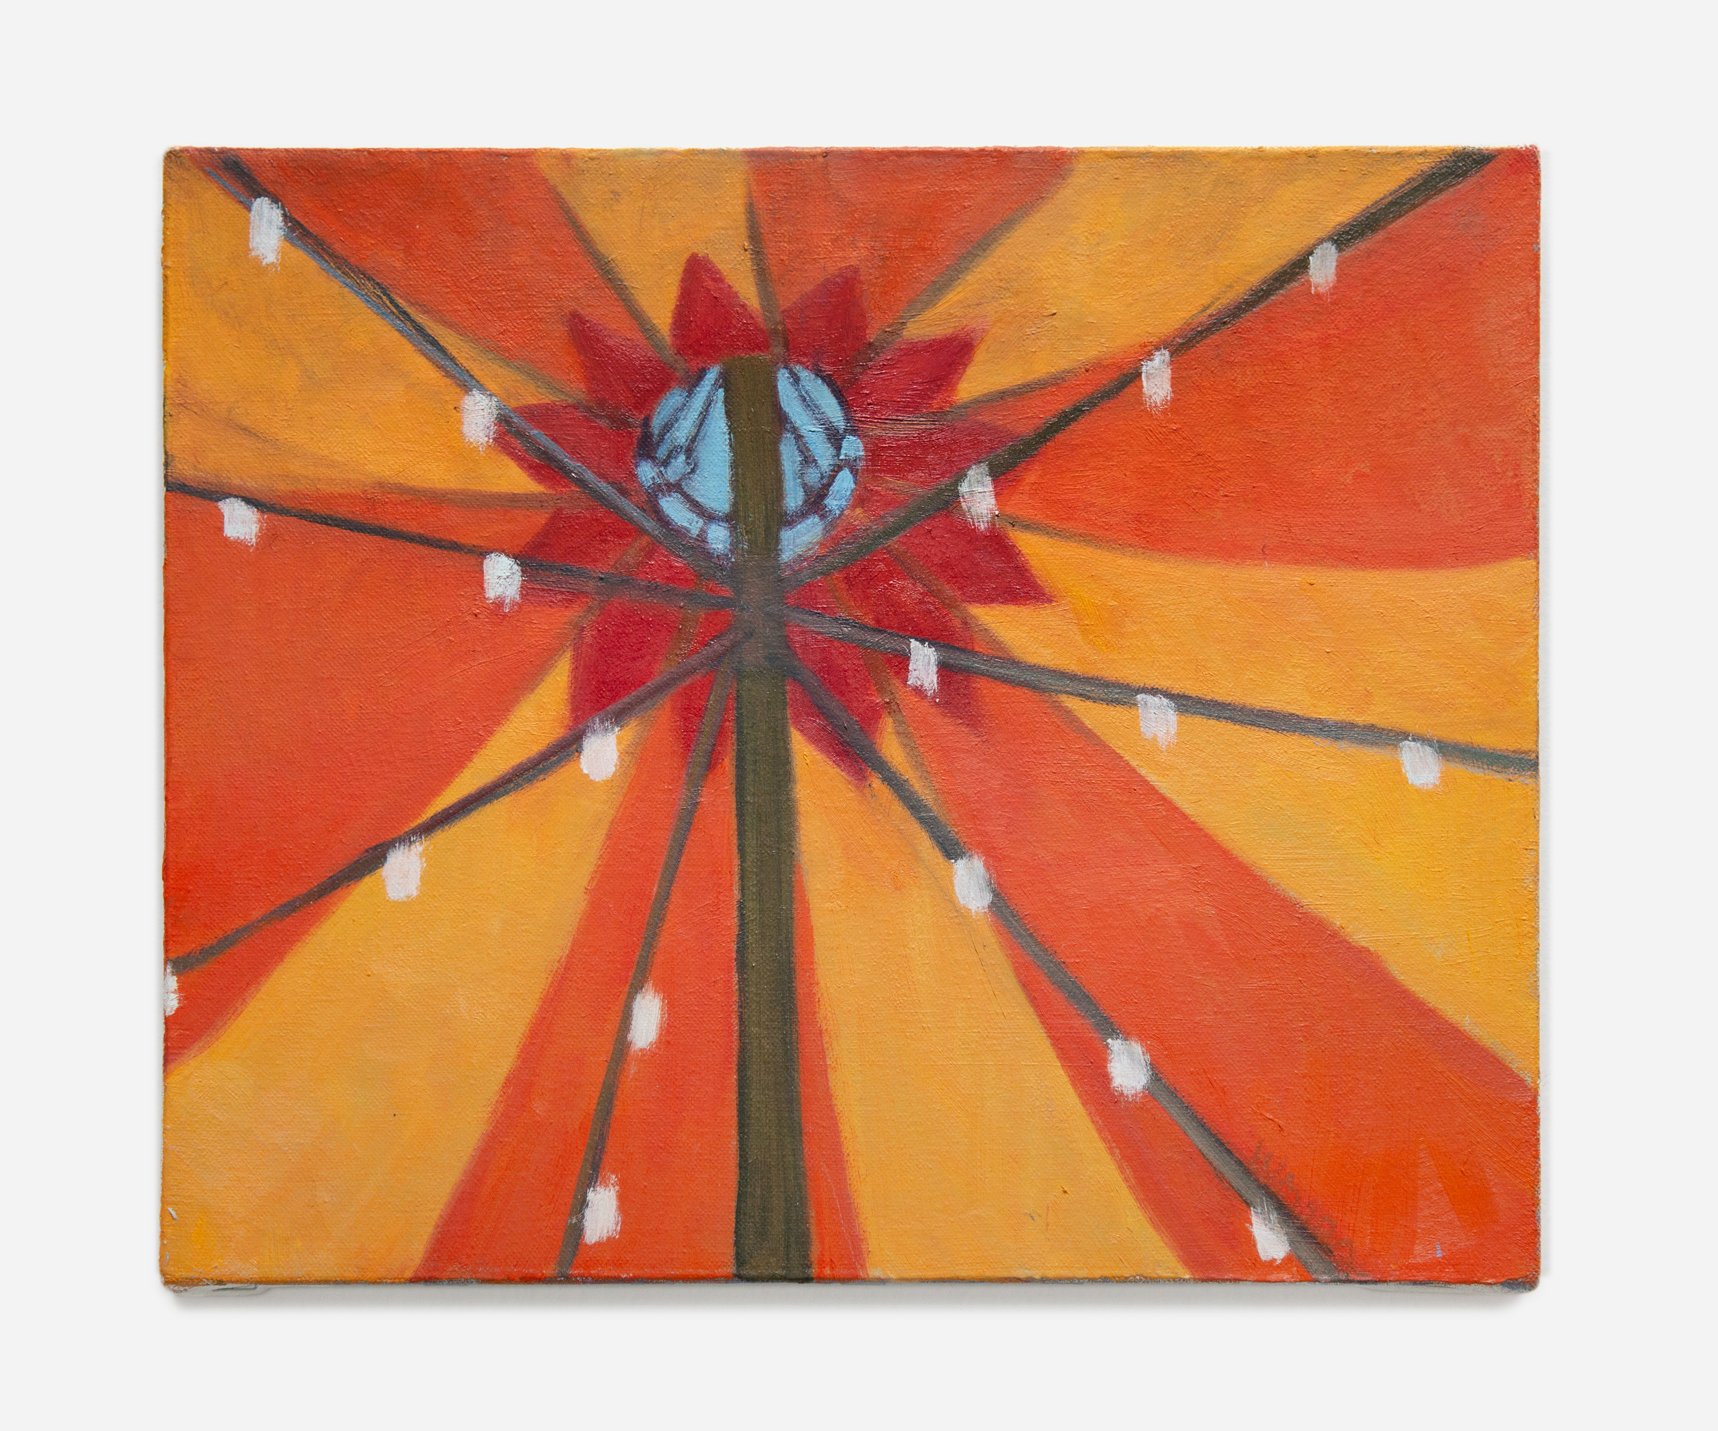   Looking Up (Orange Tent) , 2018, Oil on canvas, 11 x 13”       